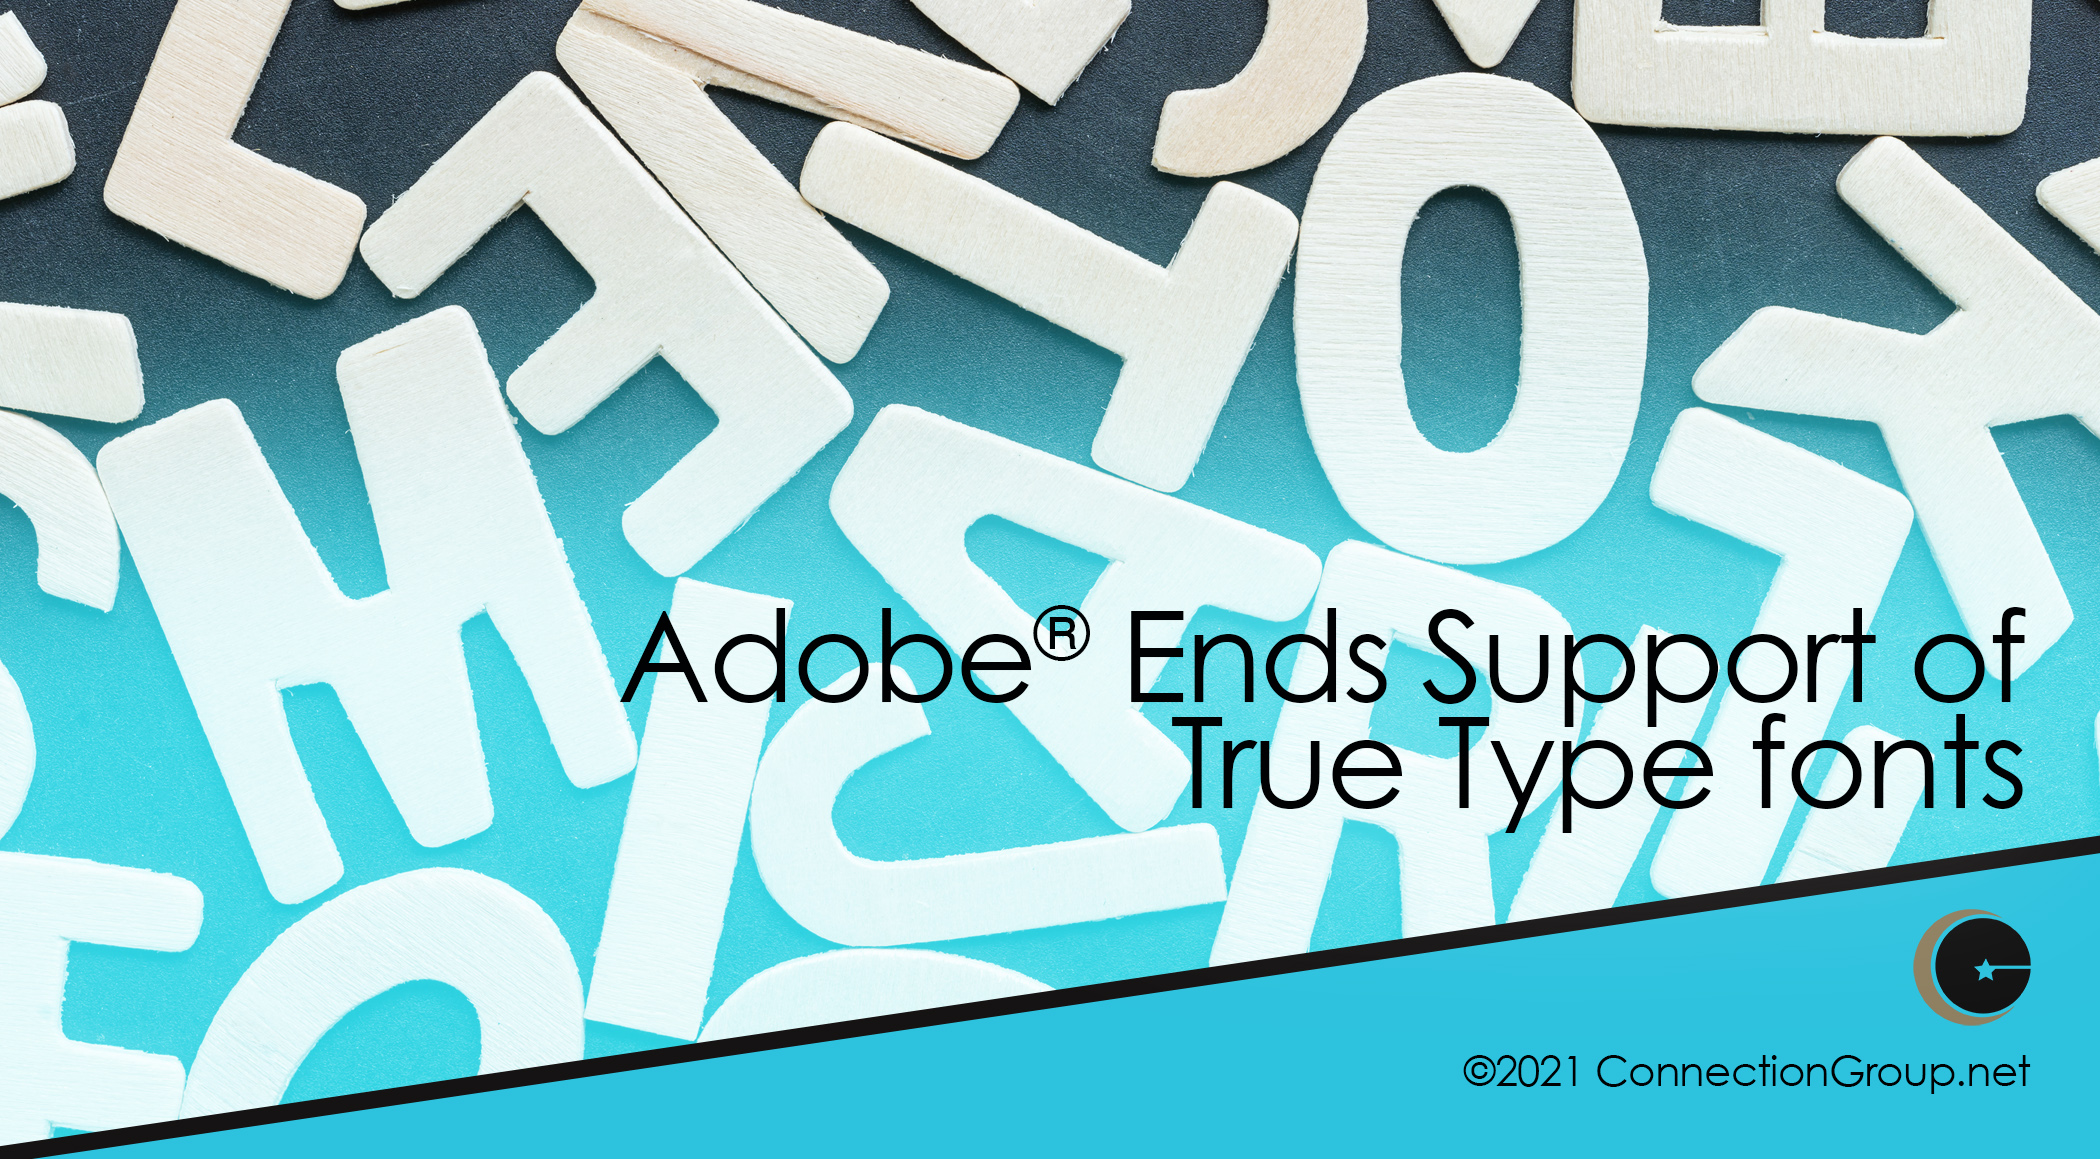 Adobe® Ends Support of True Type fonts